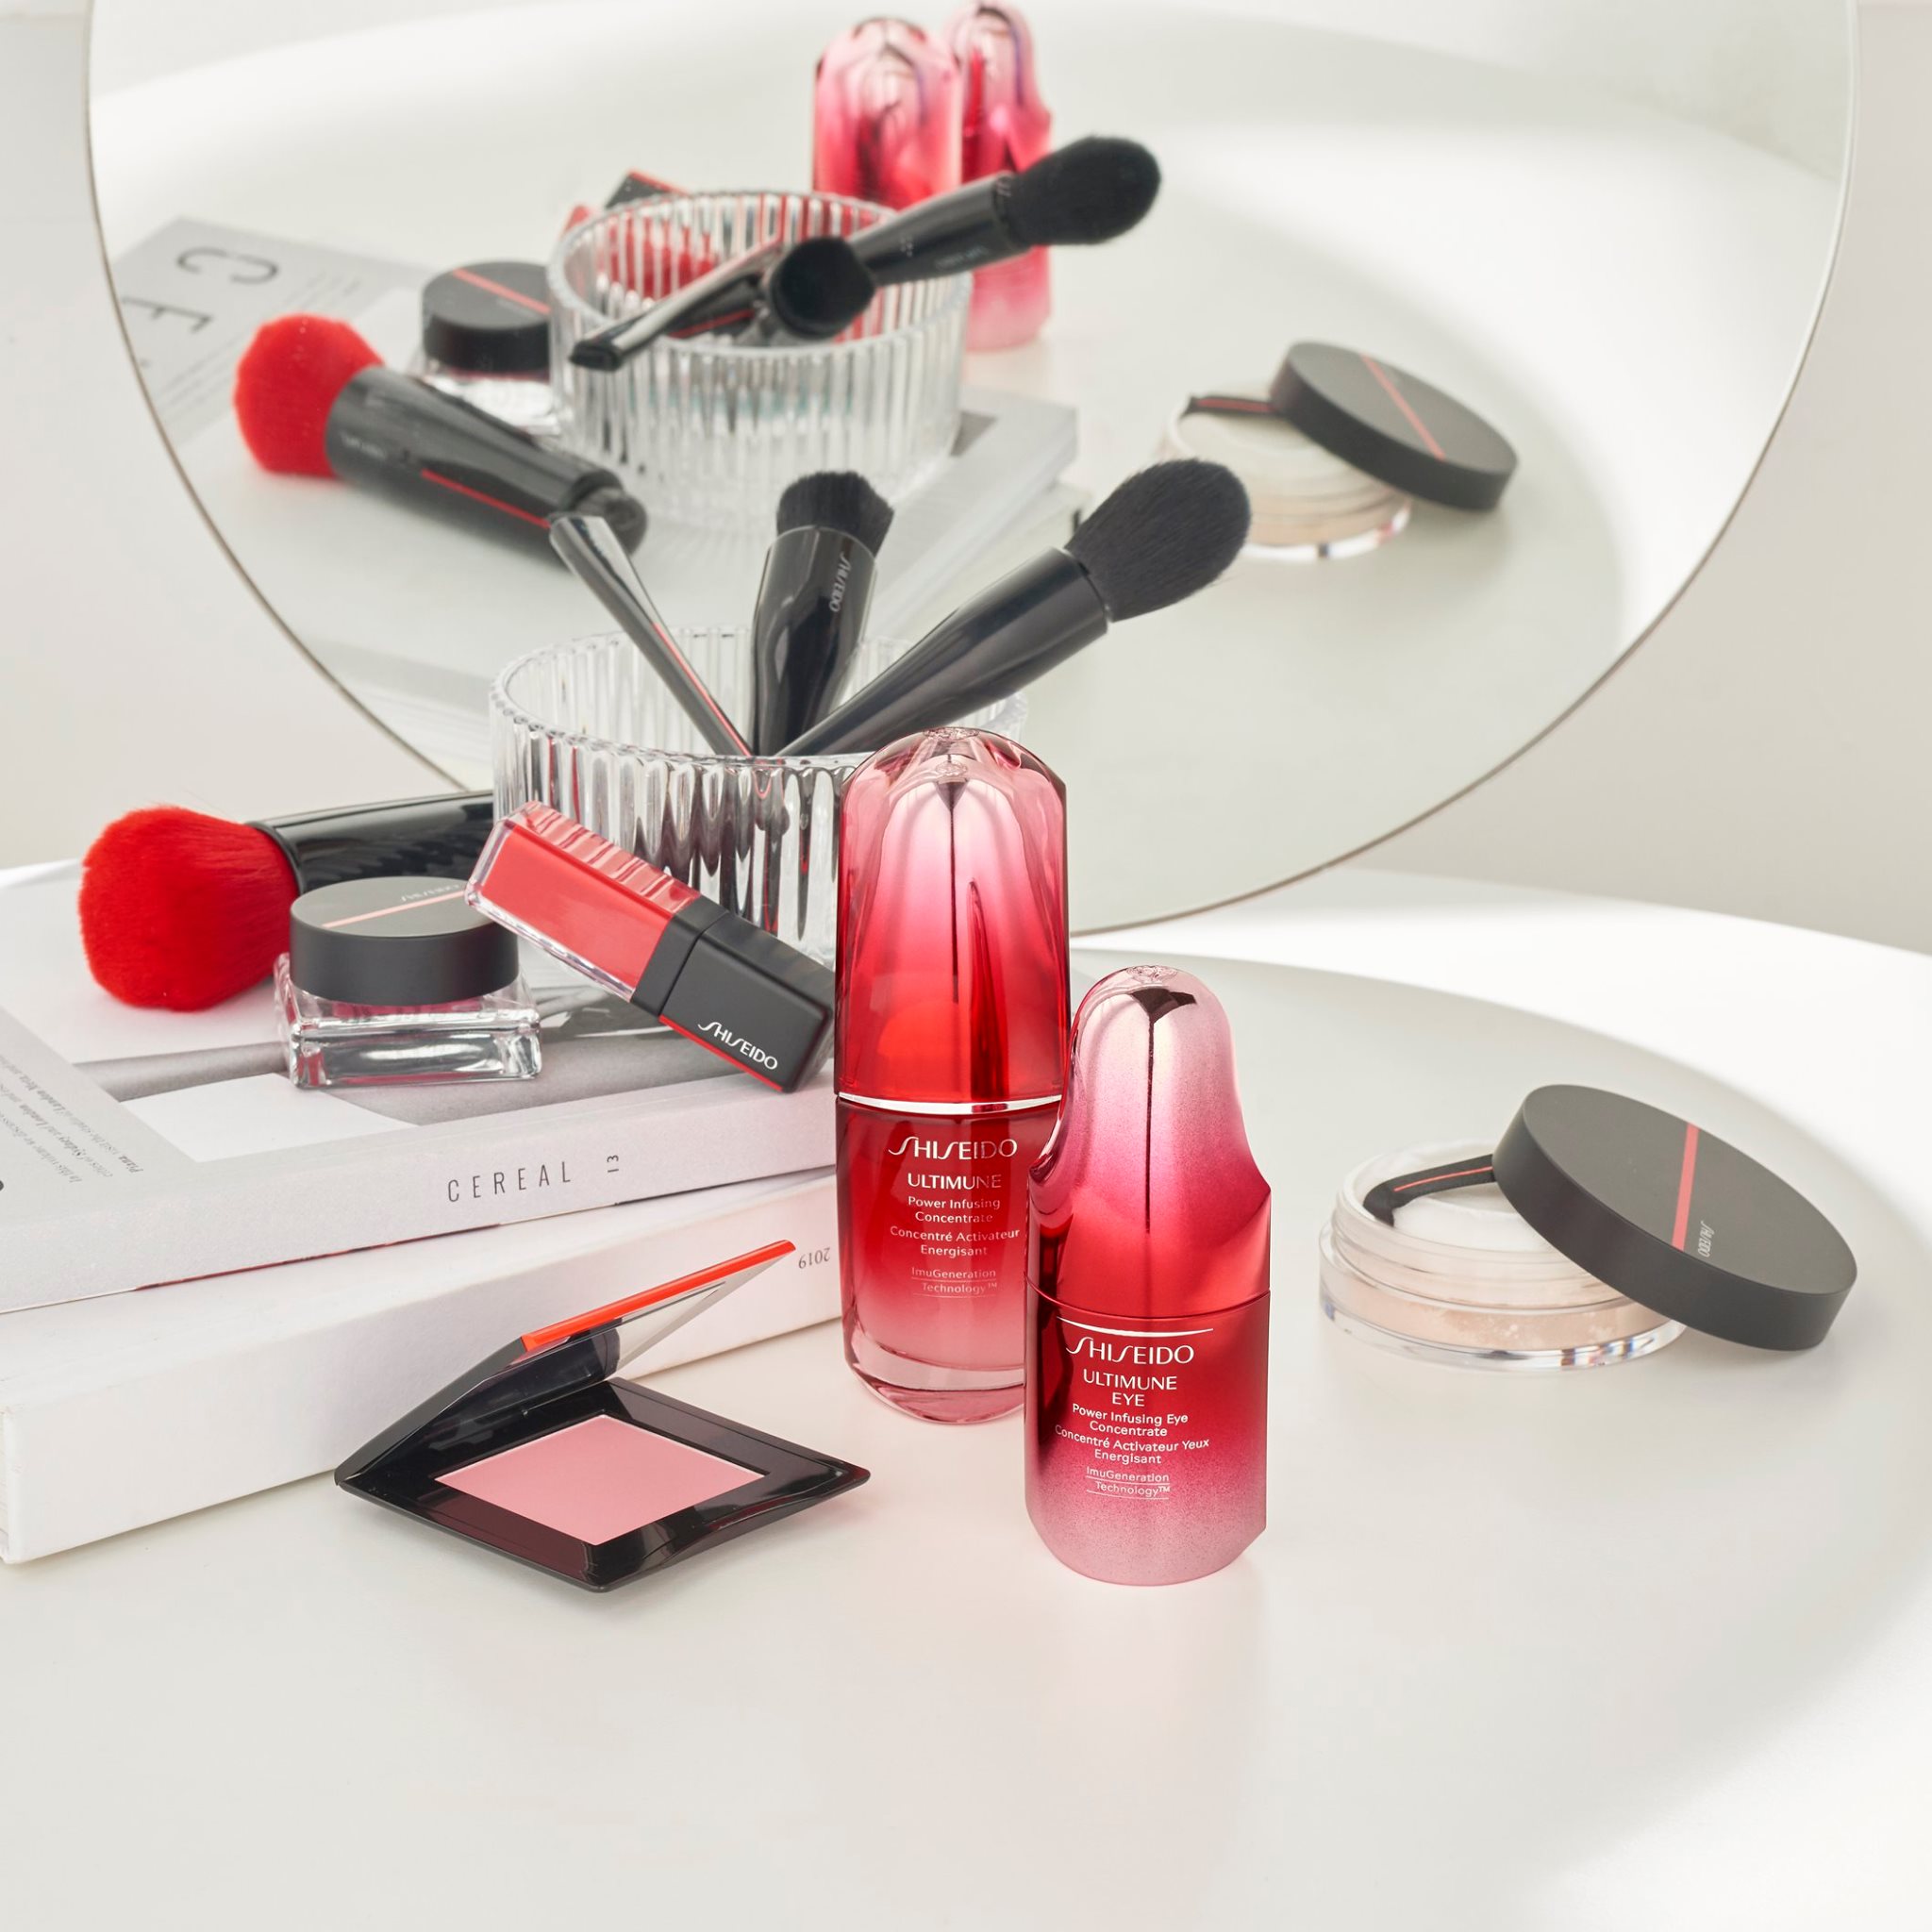 SHISEIDO,SHISEIDO Ultimune Infusing Concentrate Duo ( Serum 50 ml+ Eye 15 ml) Limited Edition ,Limited Edition,SHISEIDO Ultimune Infusing Concentrate Duo,SHISEIDO Ultimune Infusing Concentrate Duo รีวิว,